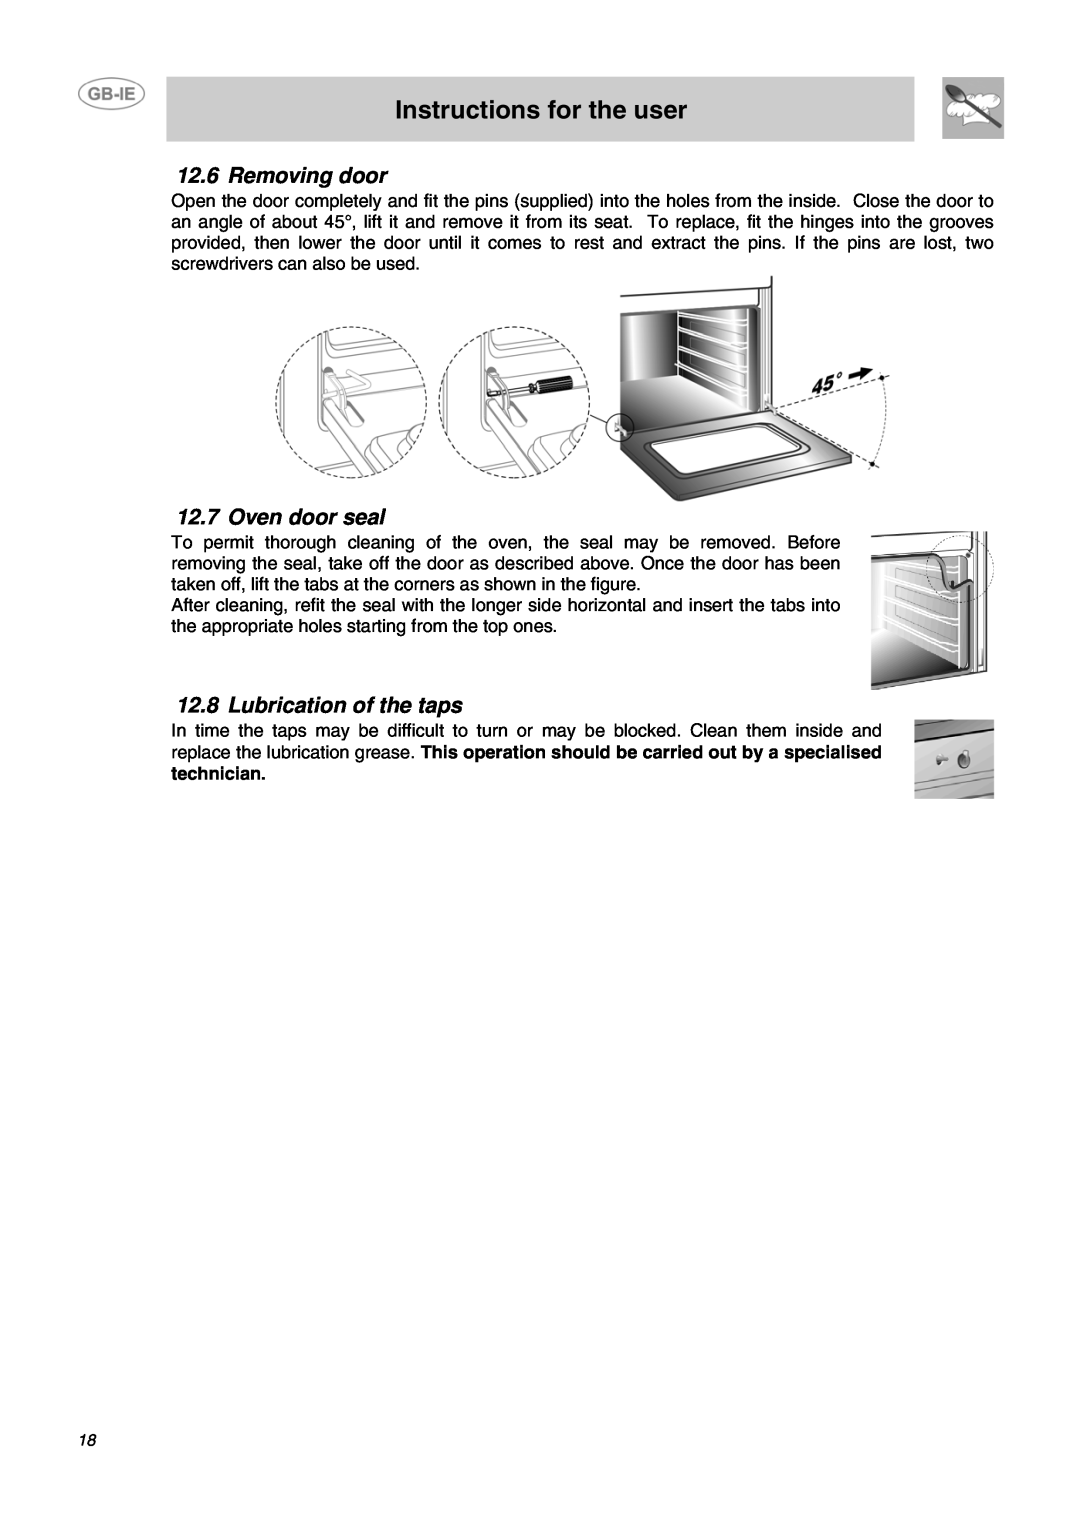 Smeg B72MFX5 manual Removing door, Oven door seal, Lubrication of the taps, Instructions for the user, technician 